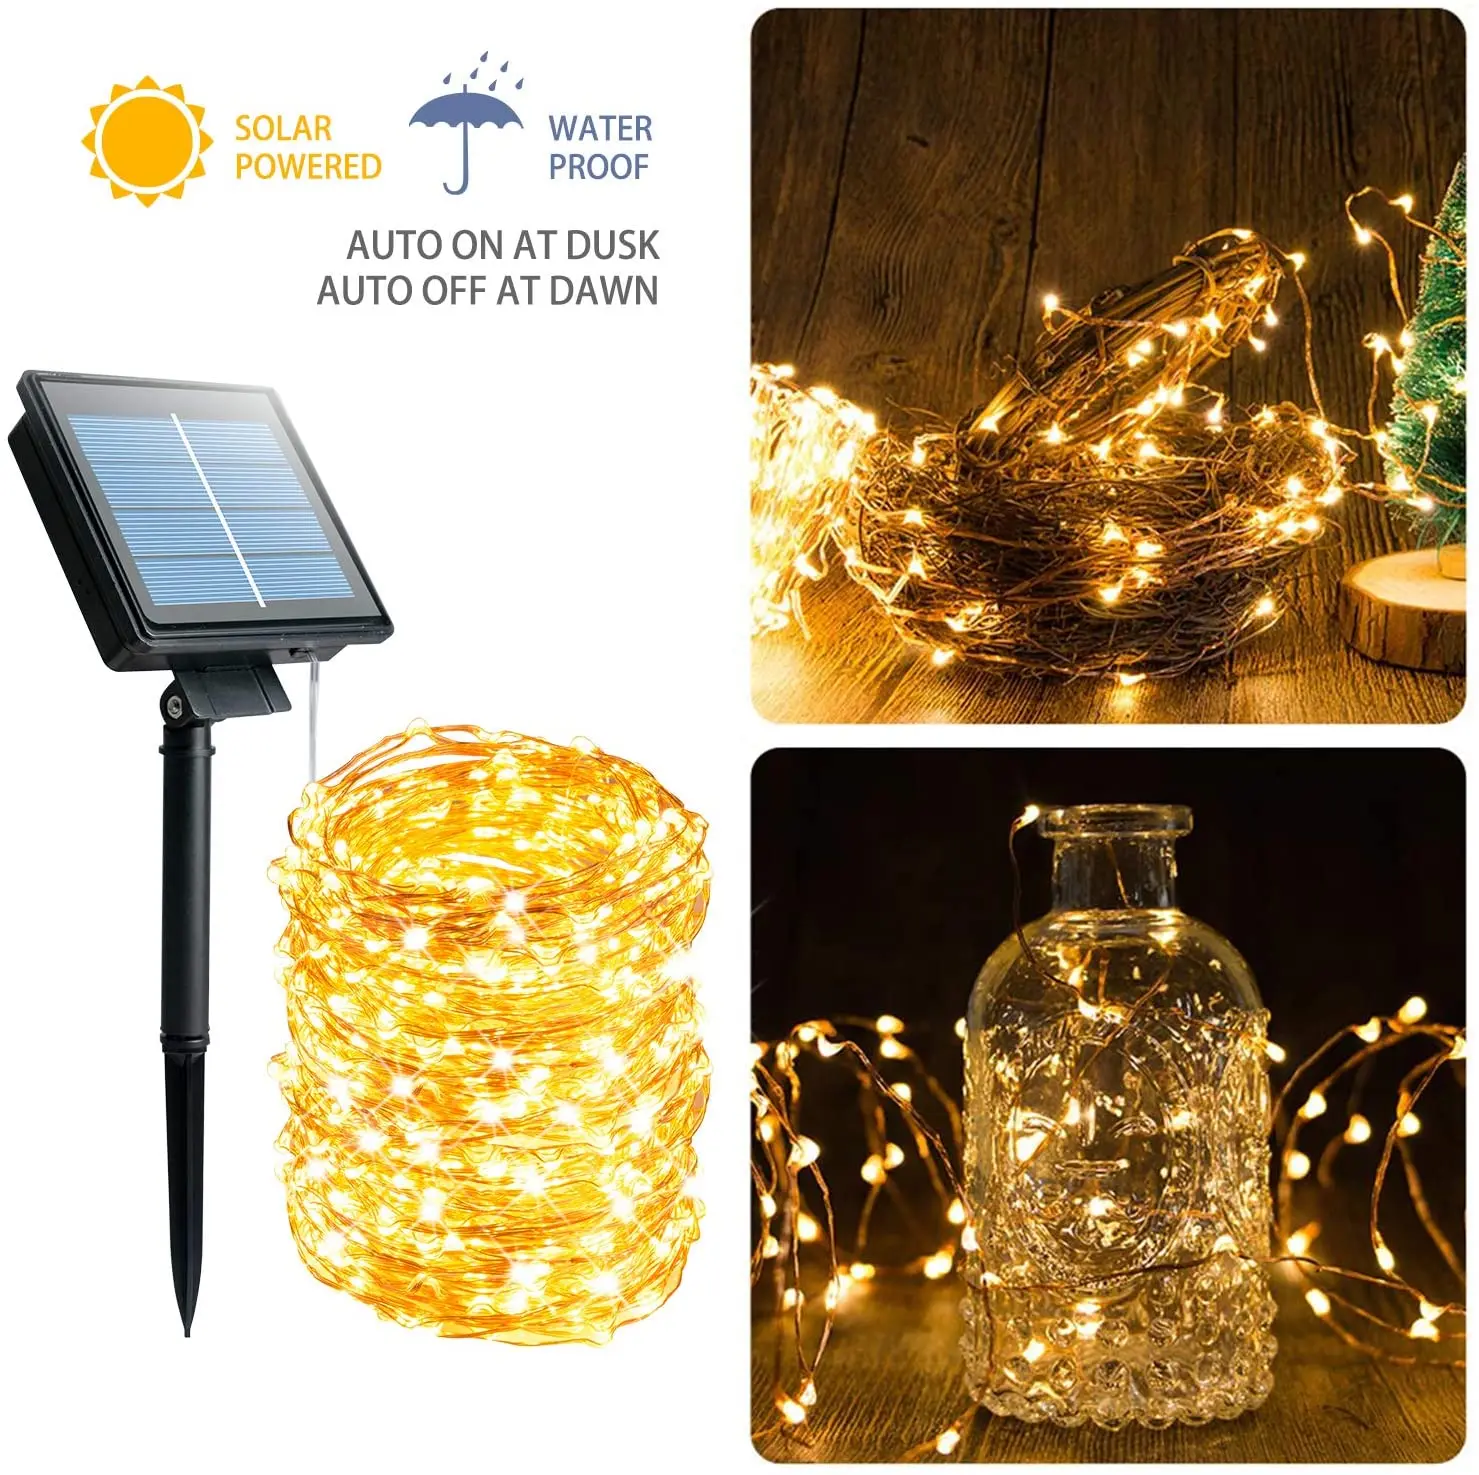 Best Outdoor Garden Solar Power Holiday Lighting Mini Christmas Party Led Warm White String Lights